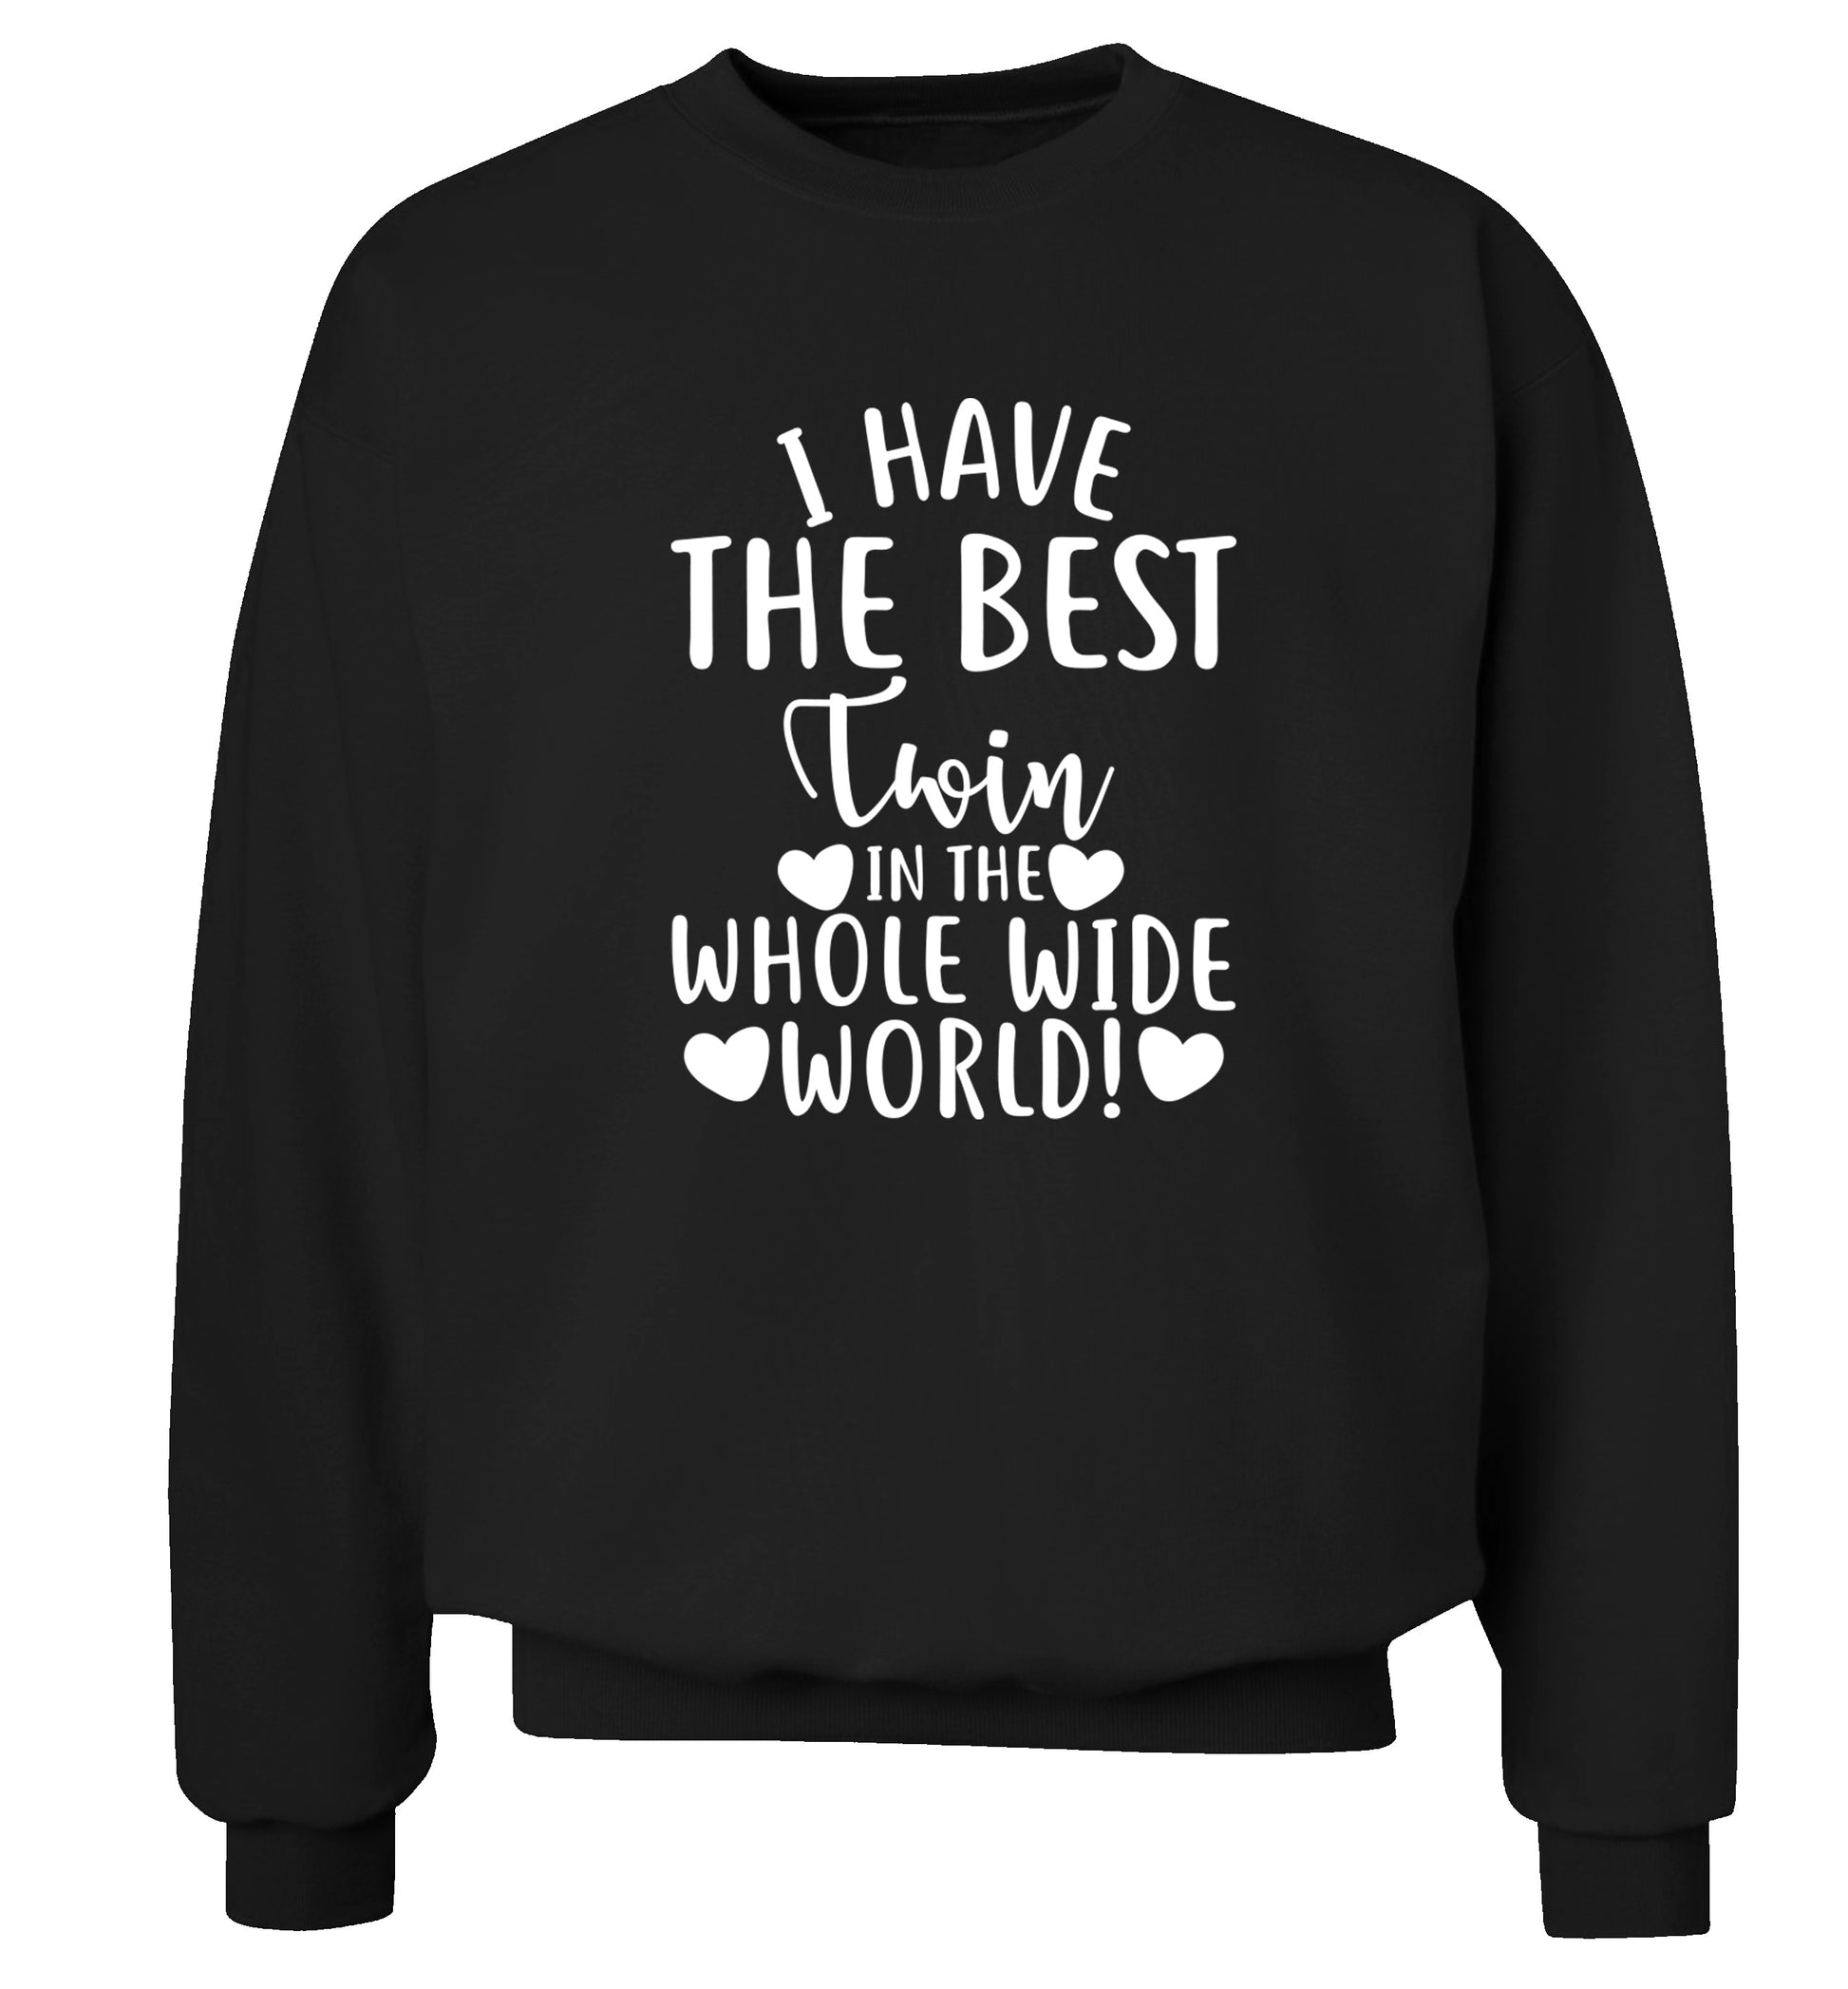 I have the best twin in the whole wide world! Adult's unisex black Sweater 2XL